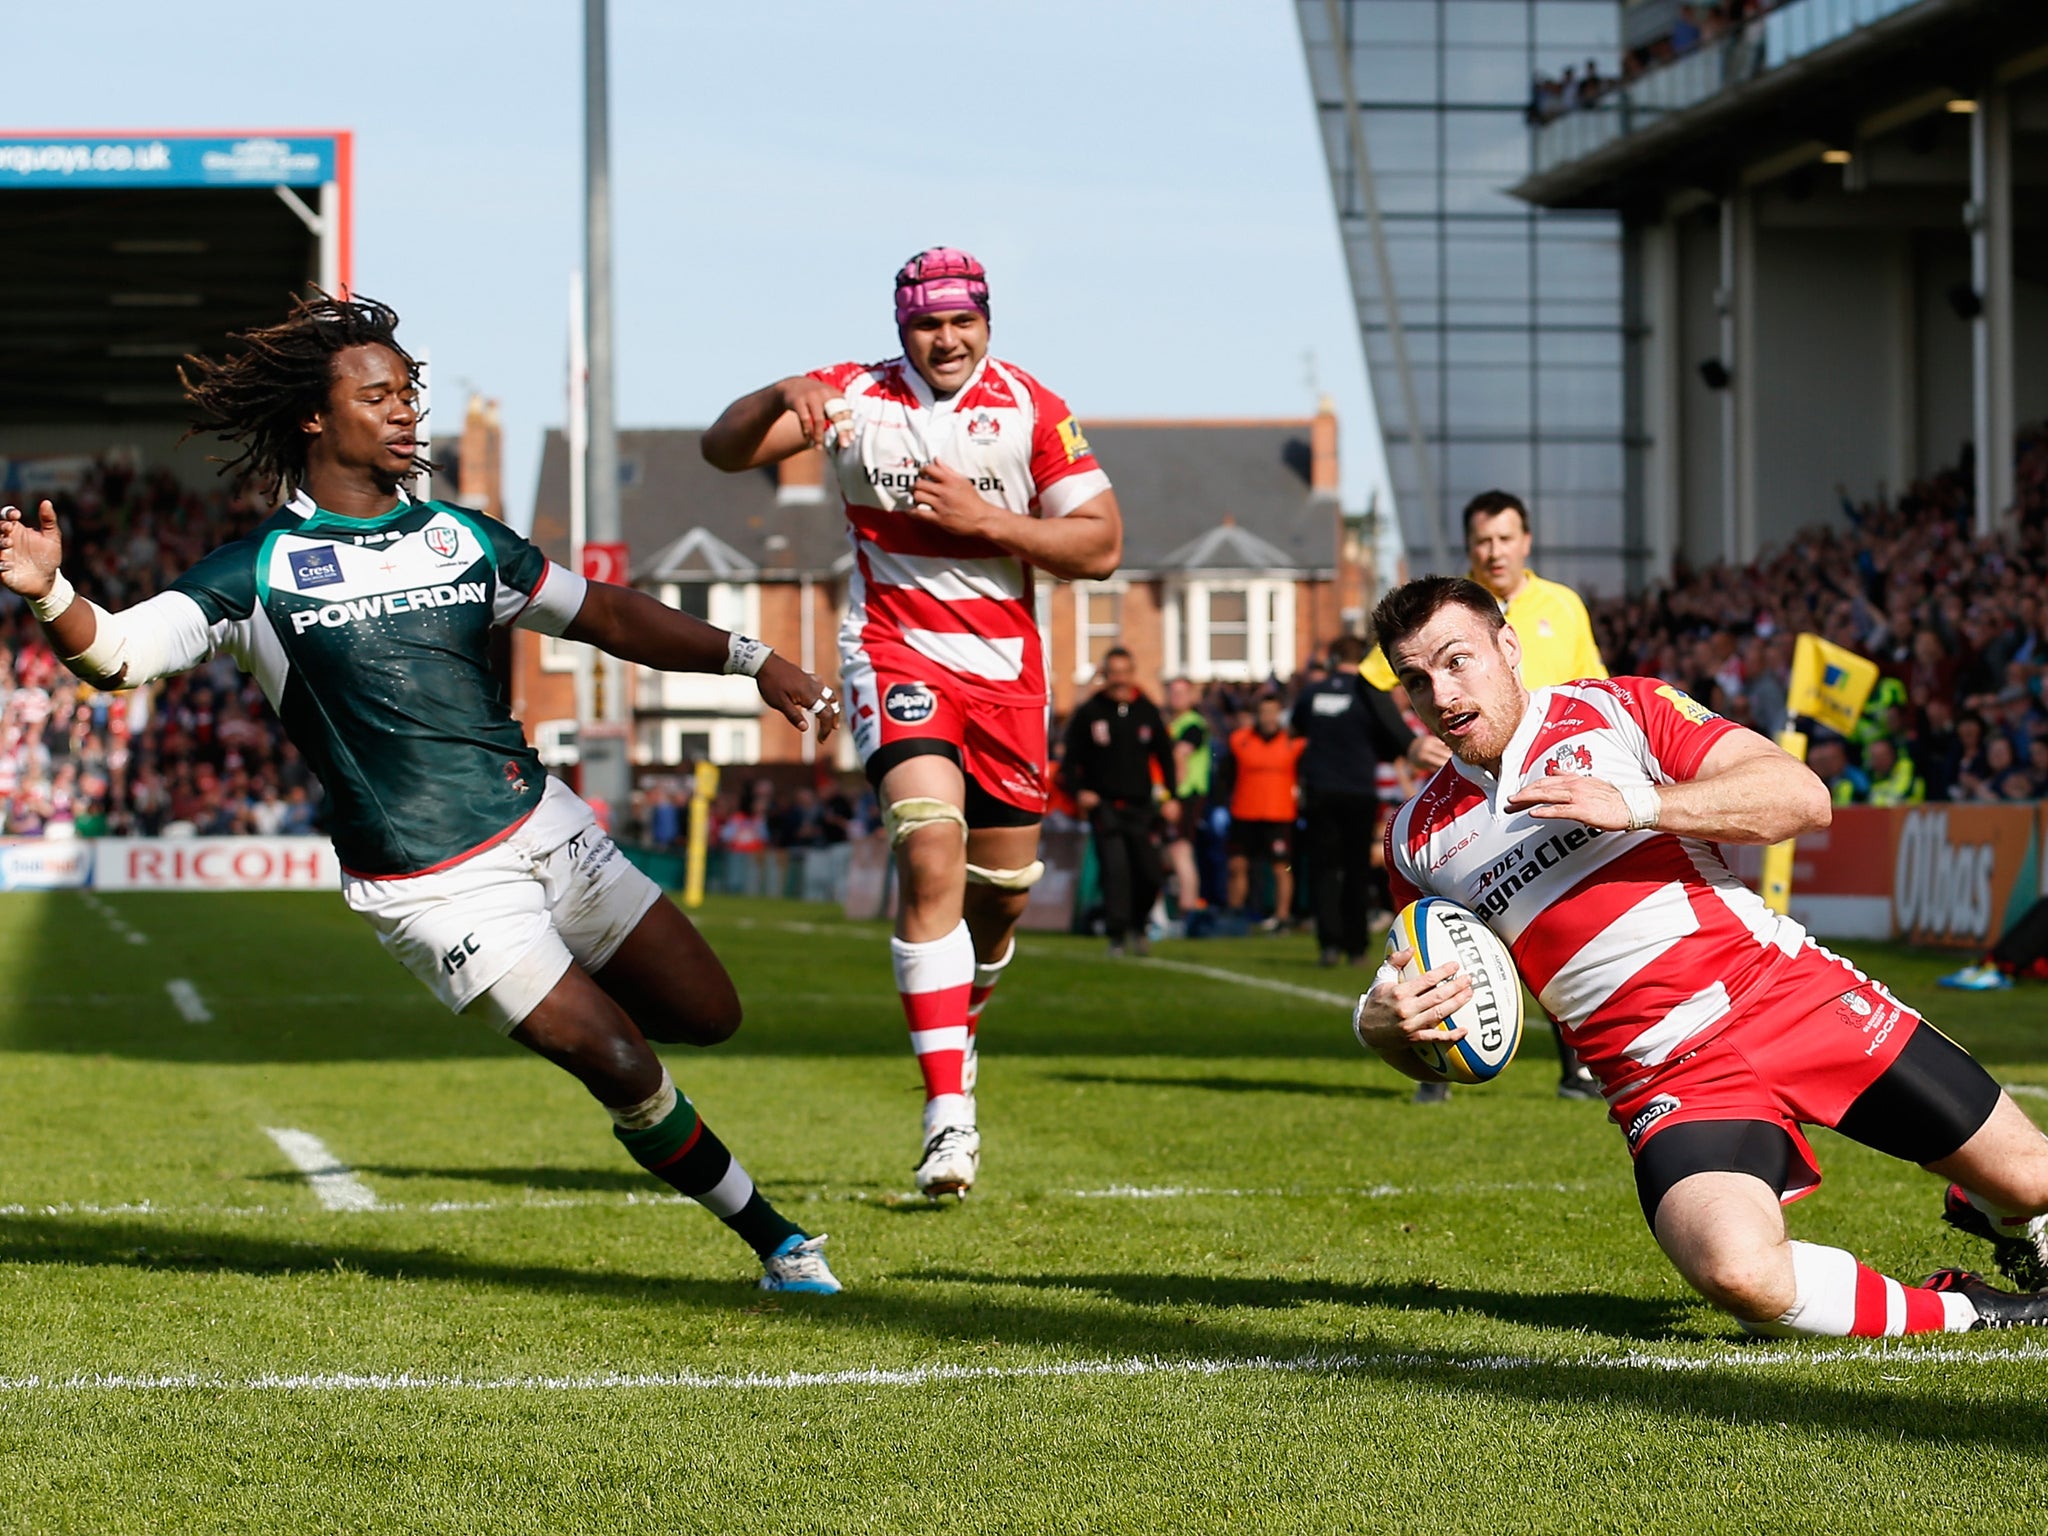 Shane Monahan of Gloucester scores the winning try during the Aviva Premiership match between Gloucester and London Irish